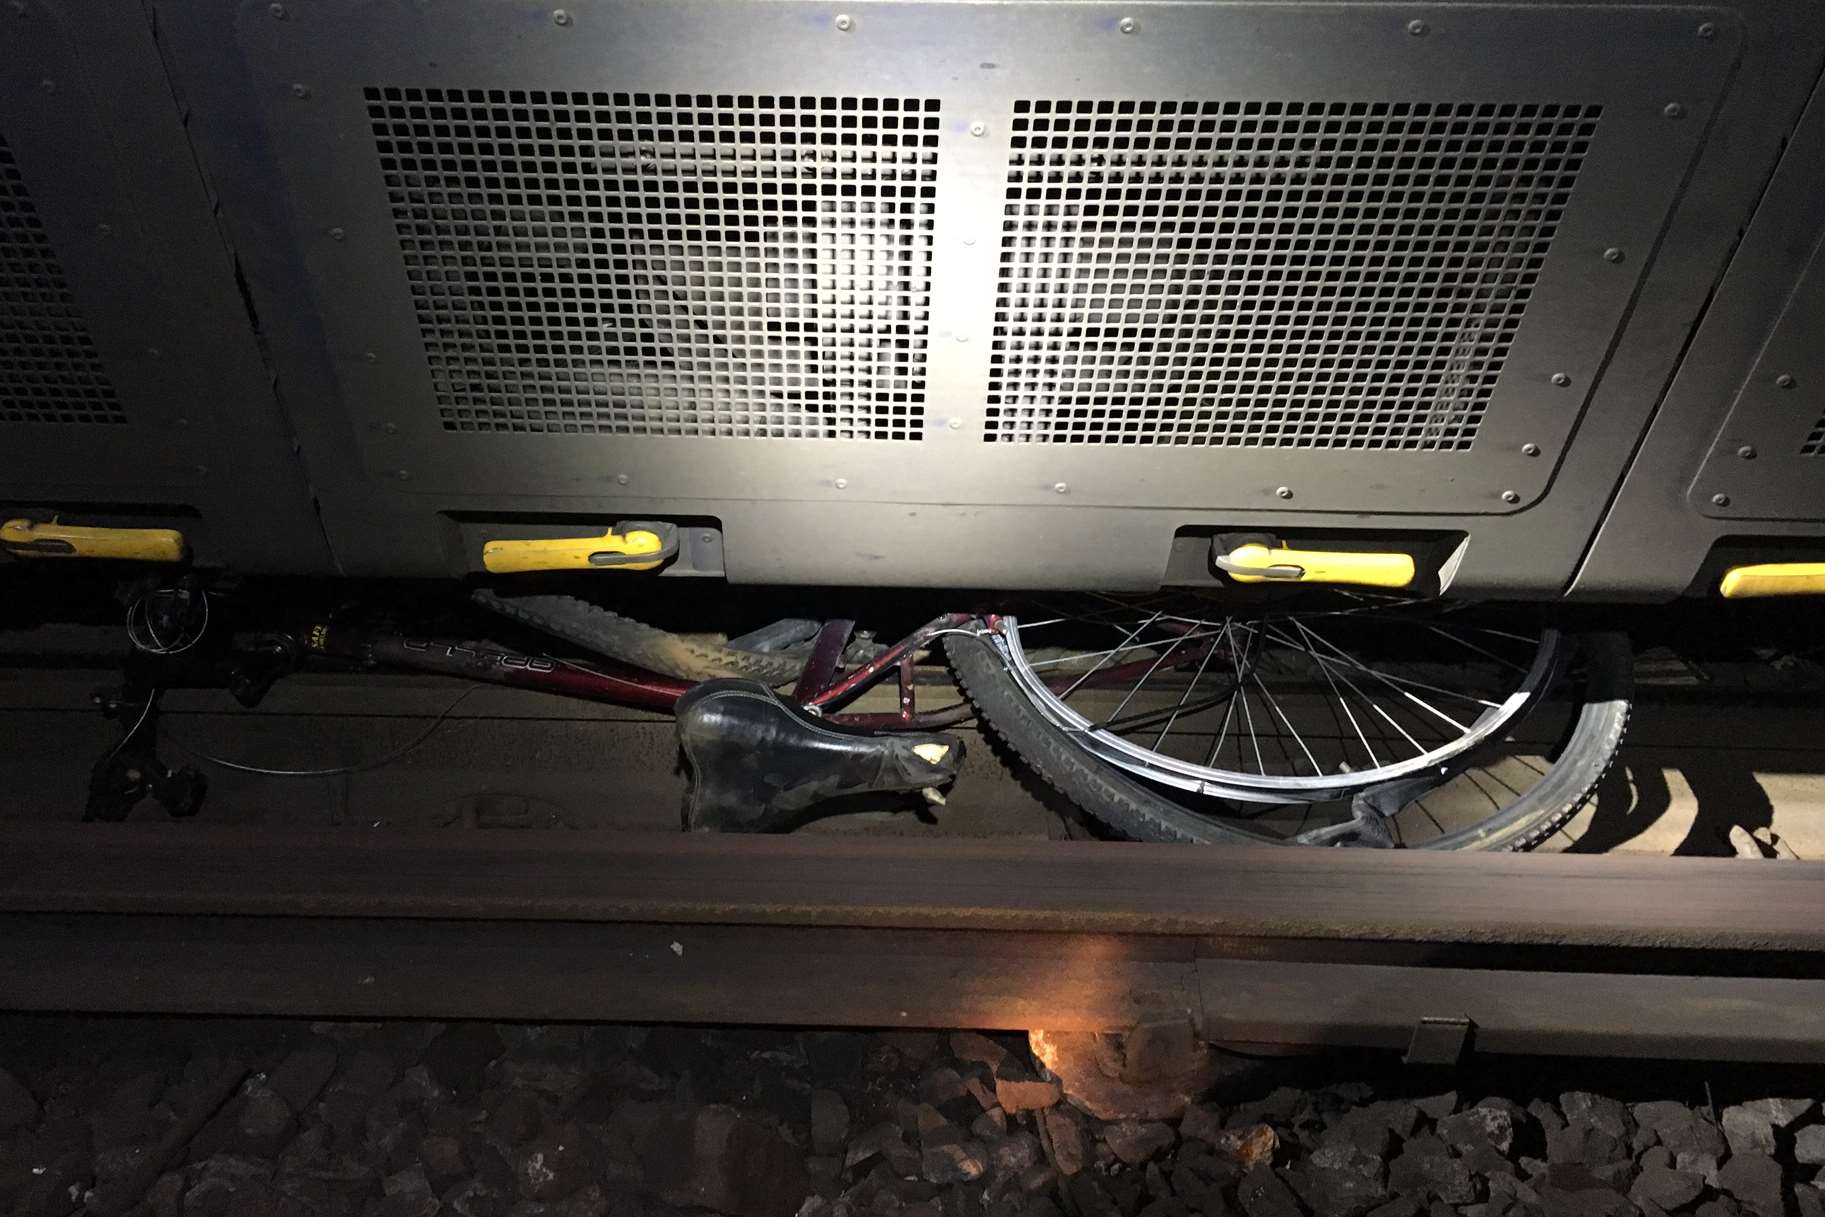 The bike was struck by a train